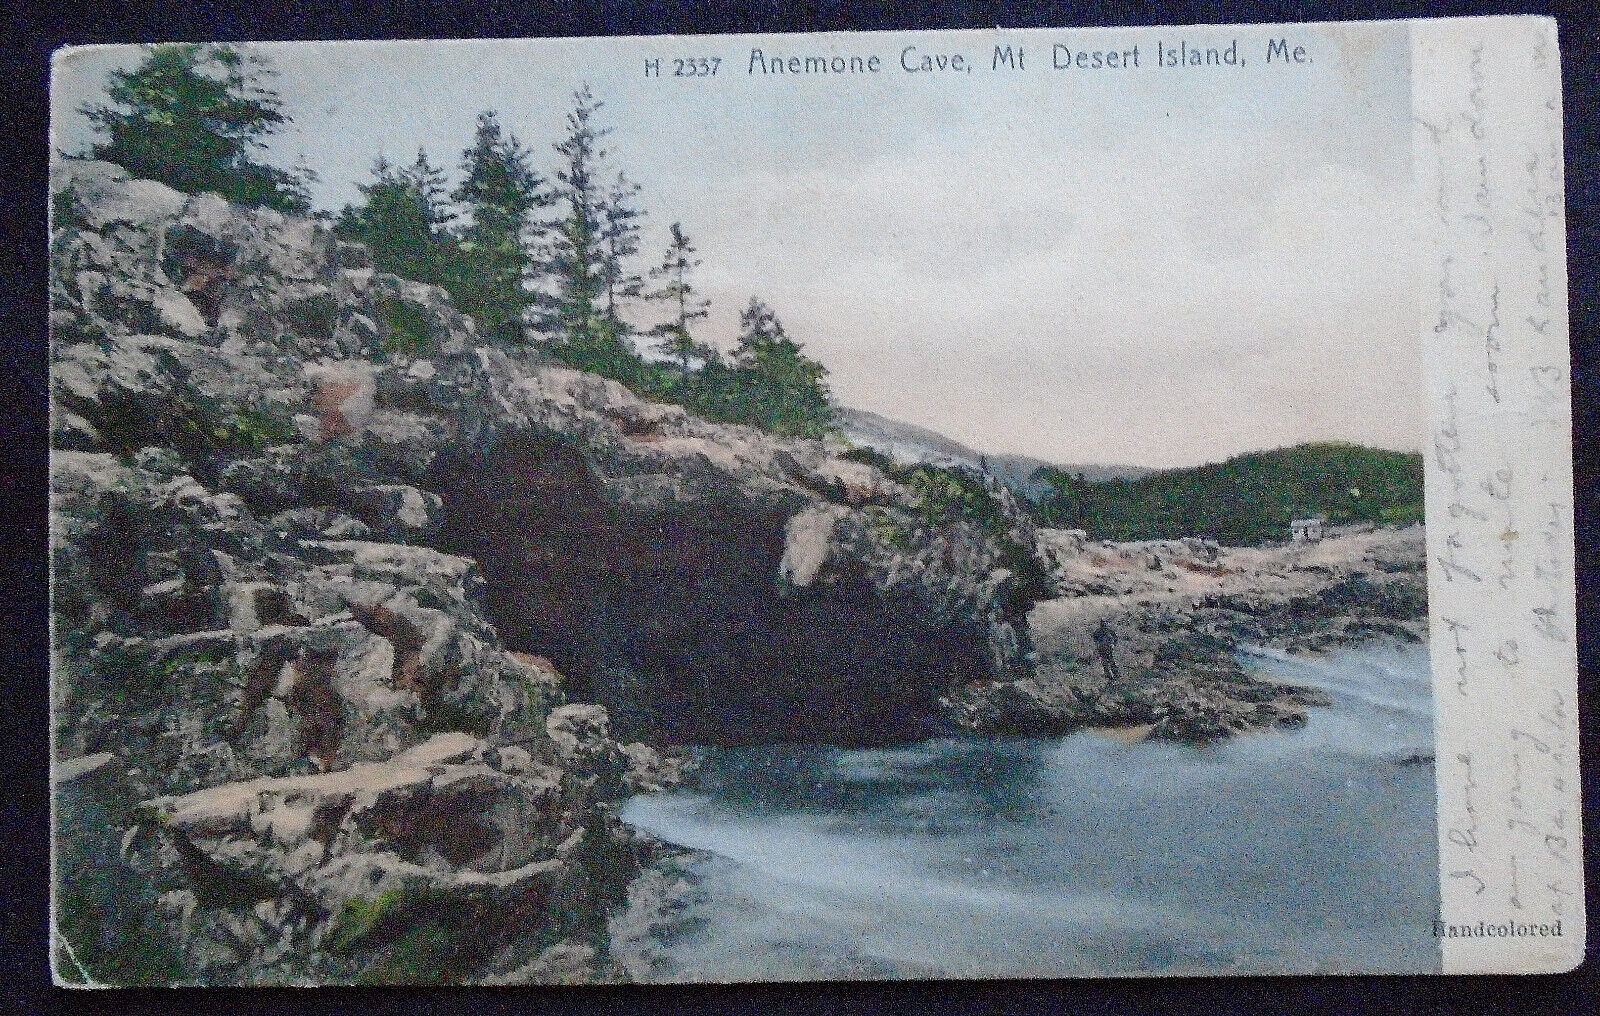 Mt. Desert, ME, Anemone Cave, handcolored, postmarked 1906